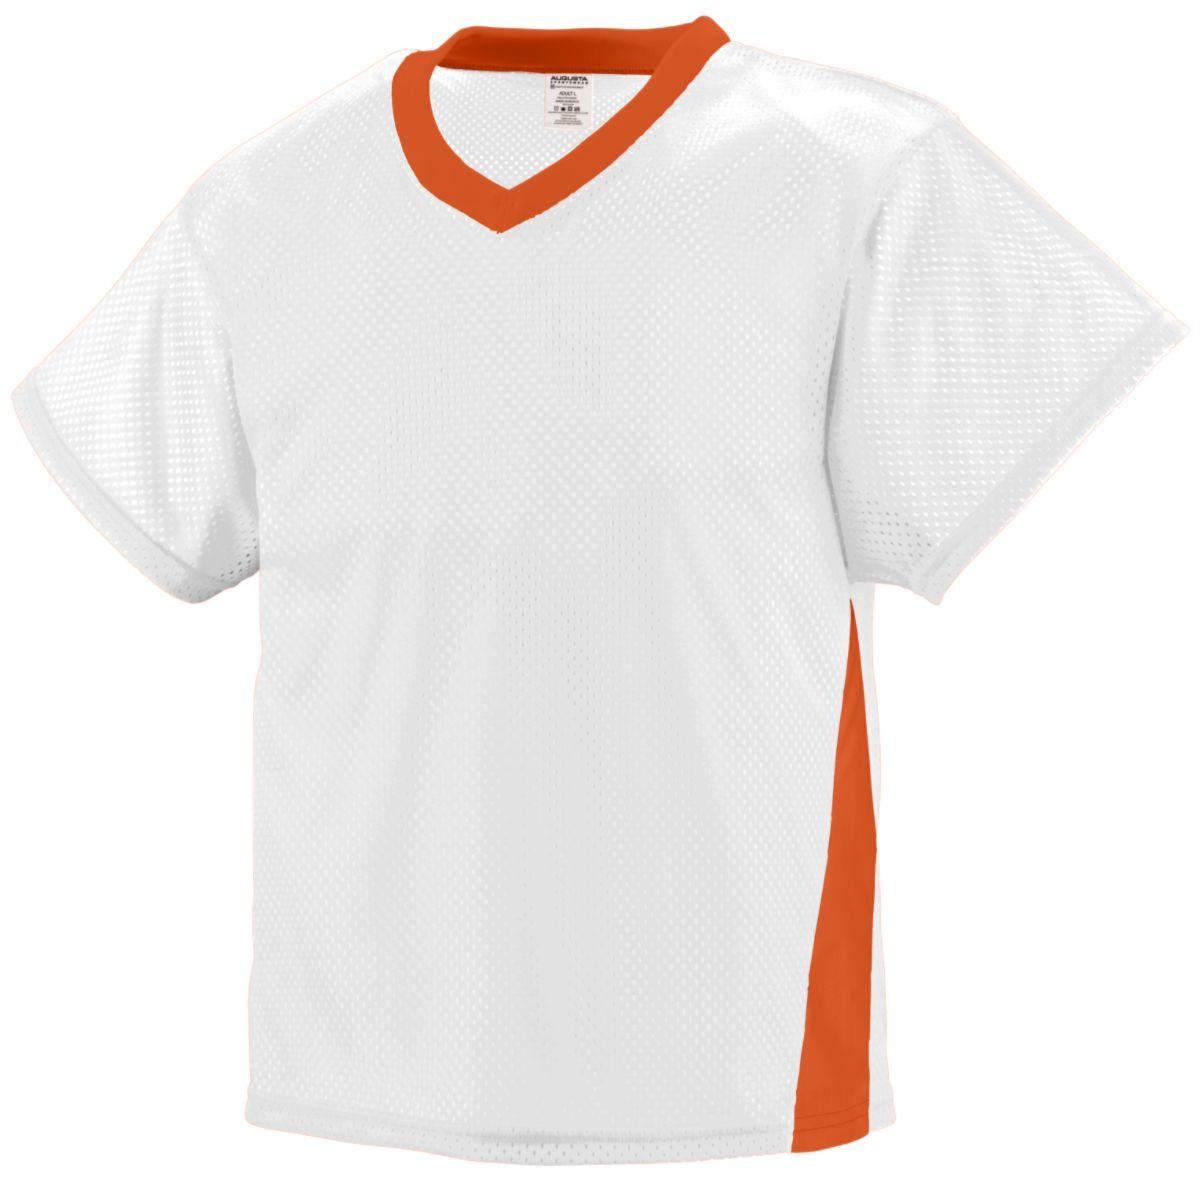 Augusta Sportswear High Score Jersey in White/Orange  -Part of the Adult, Adult-Jersey, Augusta-Products, Lacrosse, Shirts, All-Sports, All-Sports-1 product lines at KanaleyCreations.com